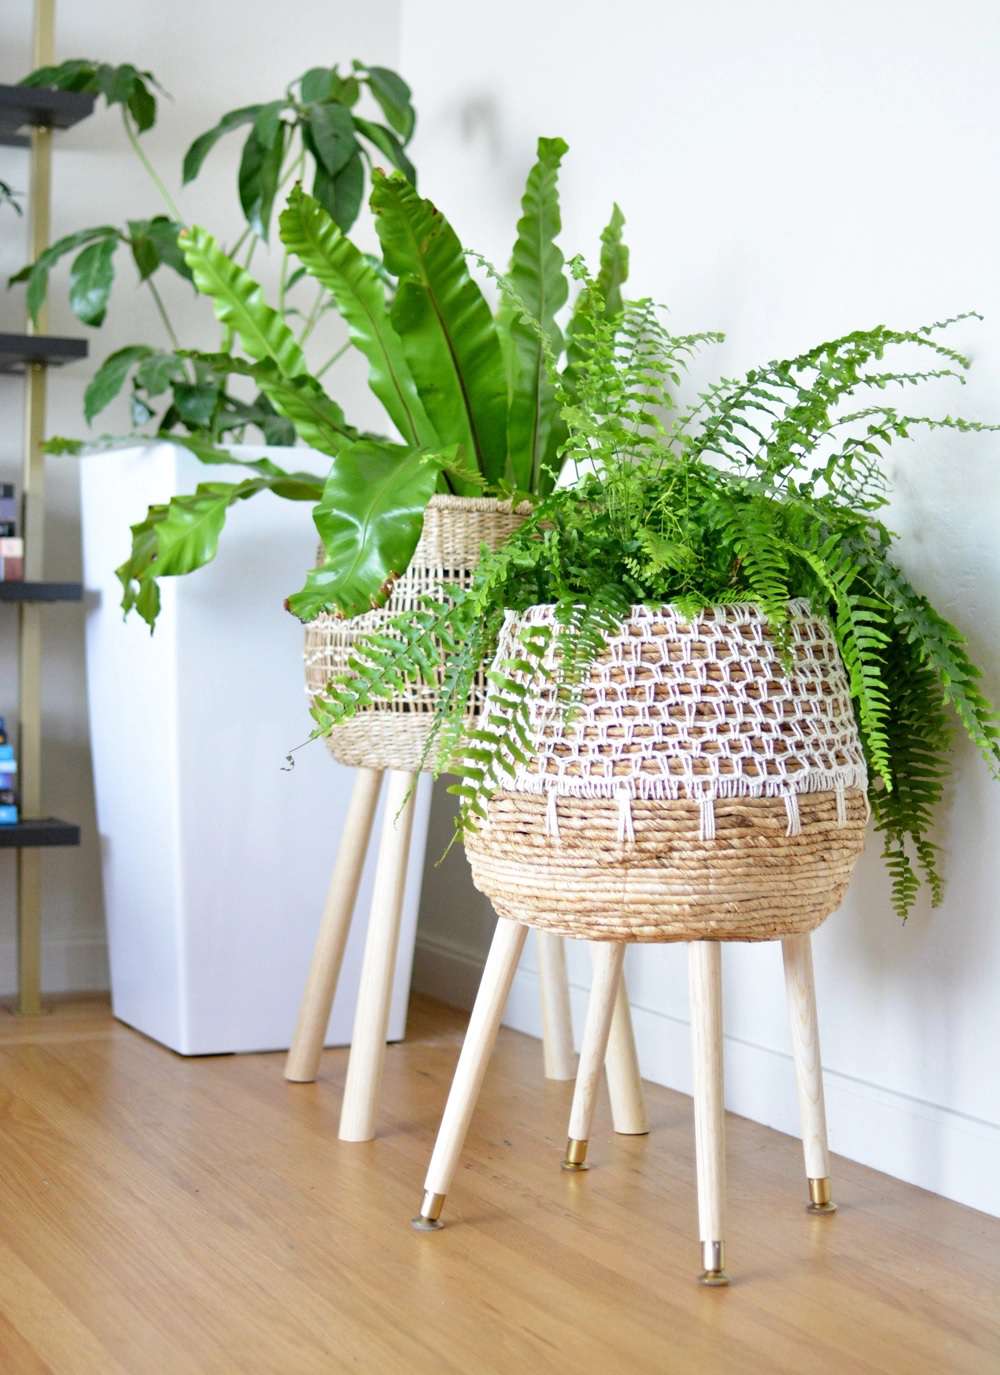 Plants in baskets with legs.